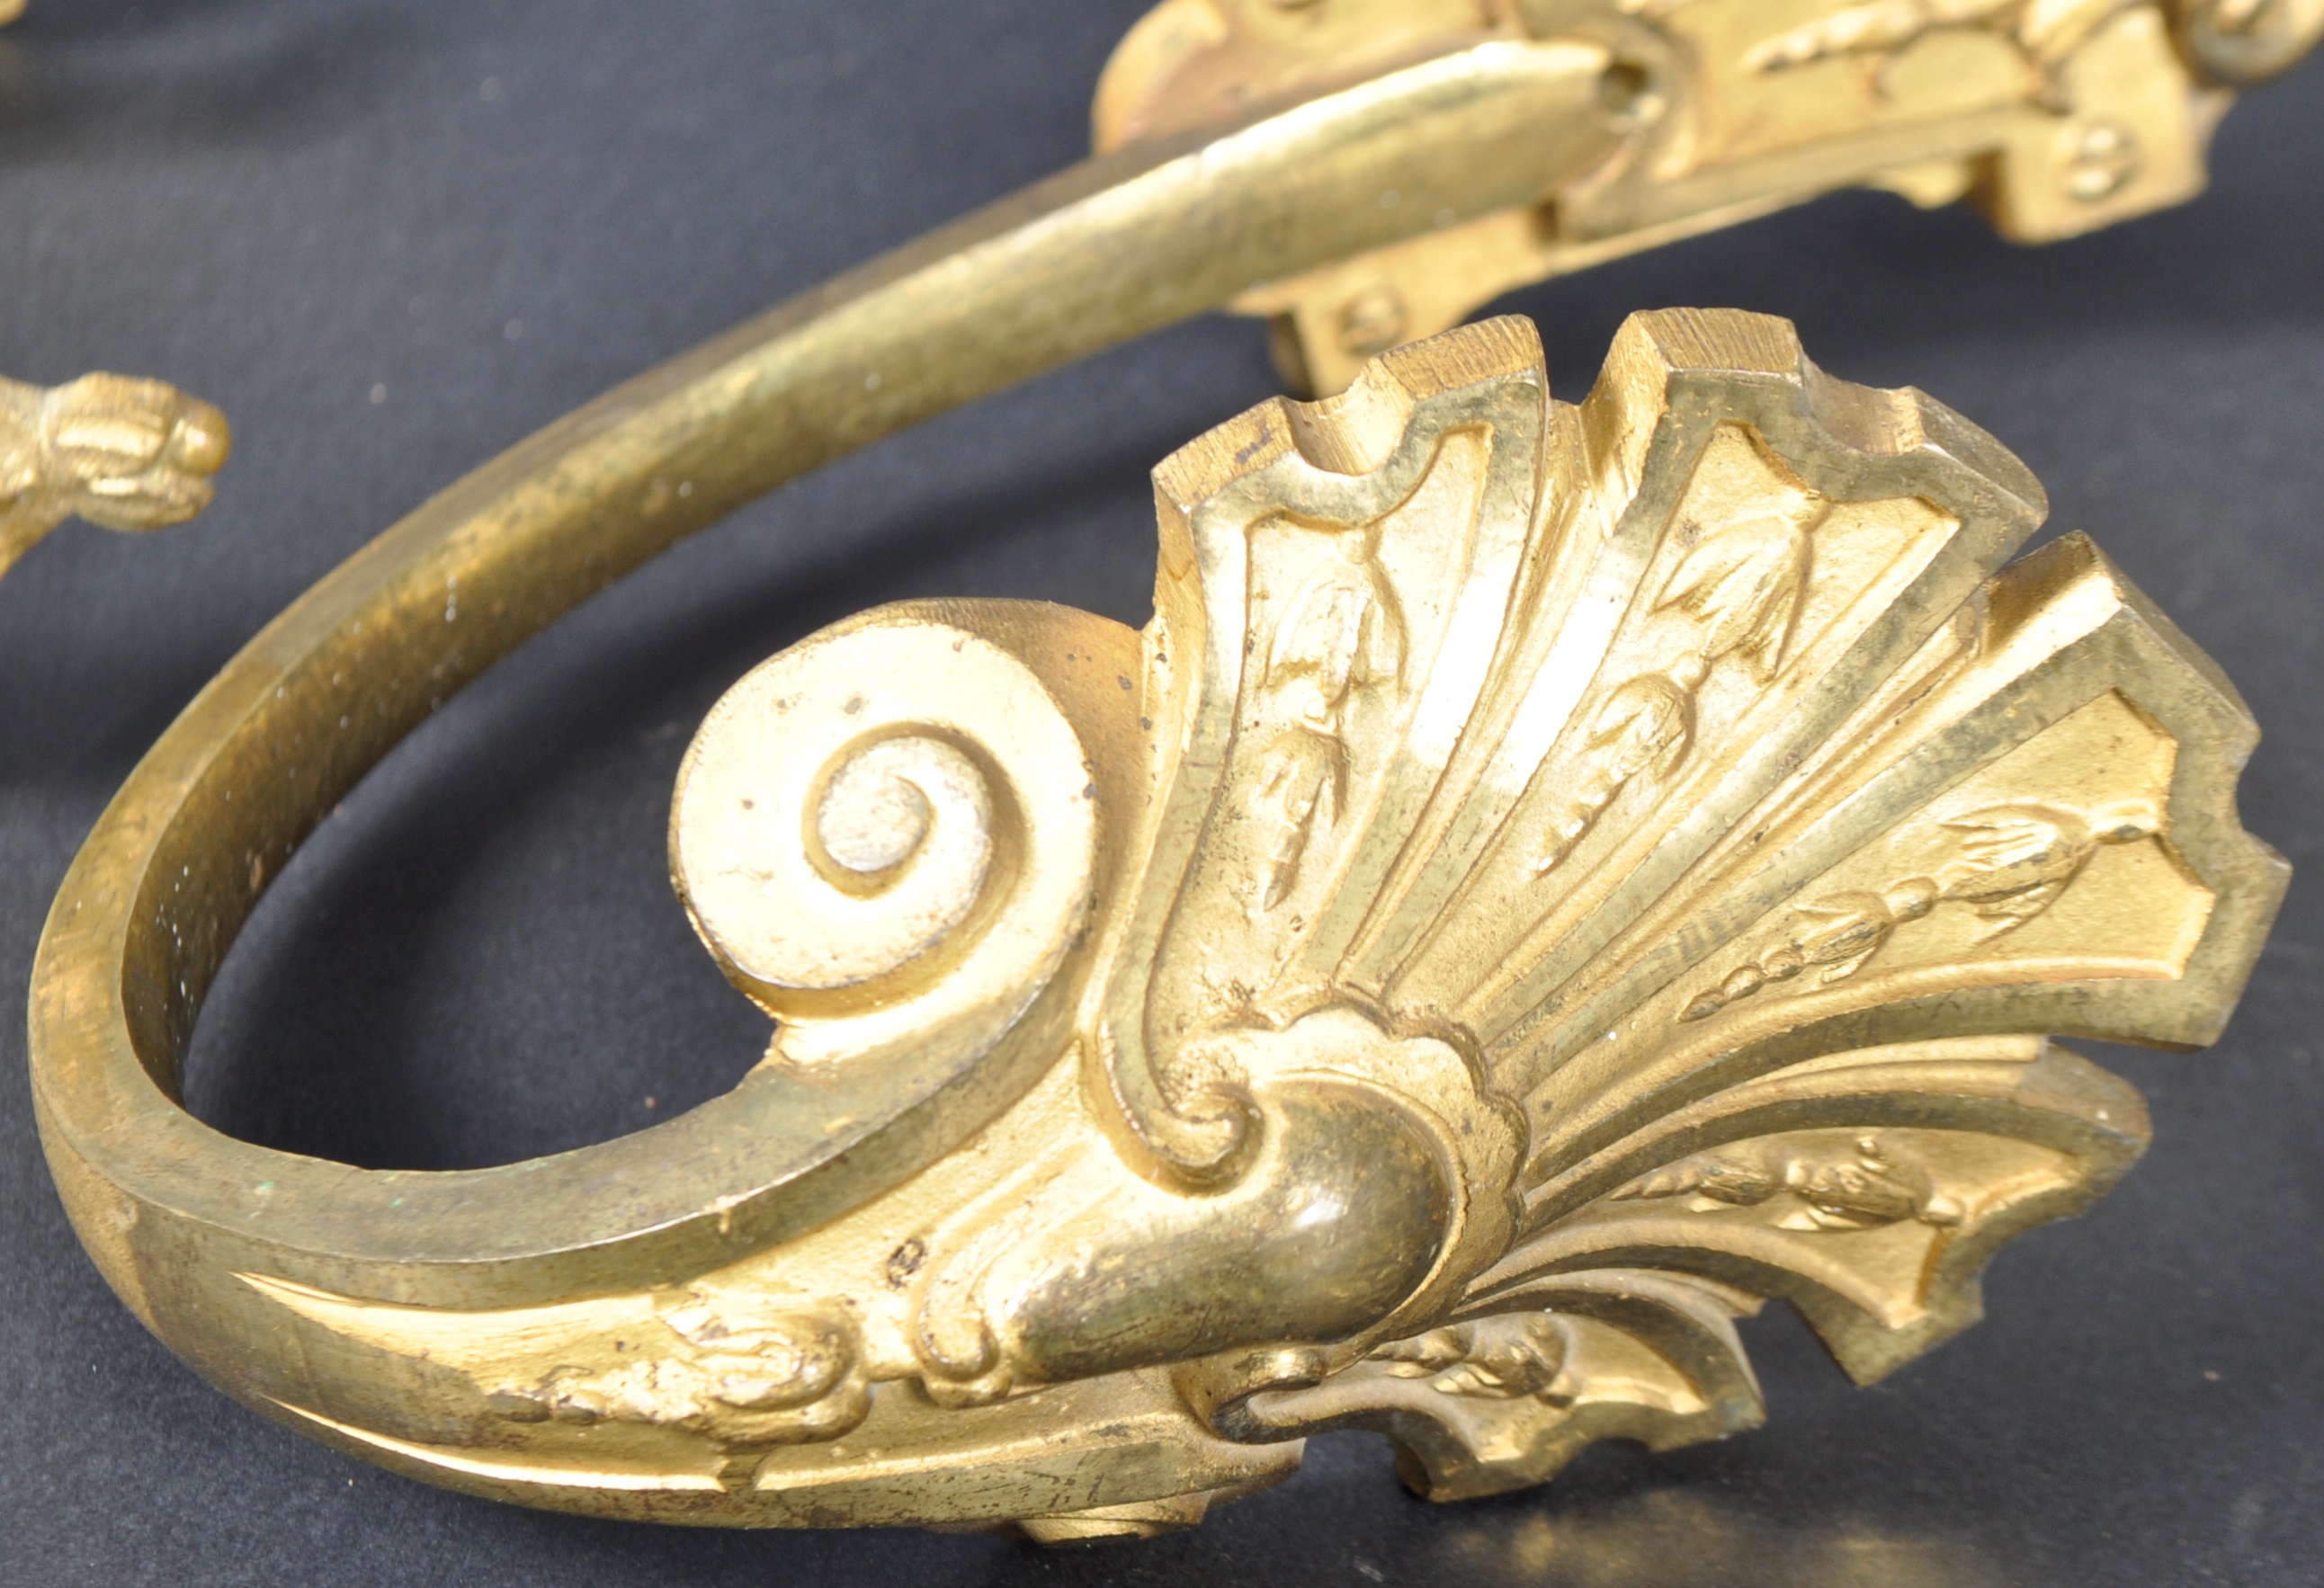 TWO PAIRS OF 19TH CENTURY FRENCH ORMOLU CURTAIN TIES - Image 4 of 8